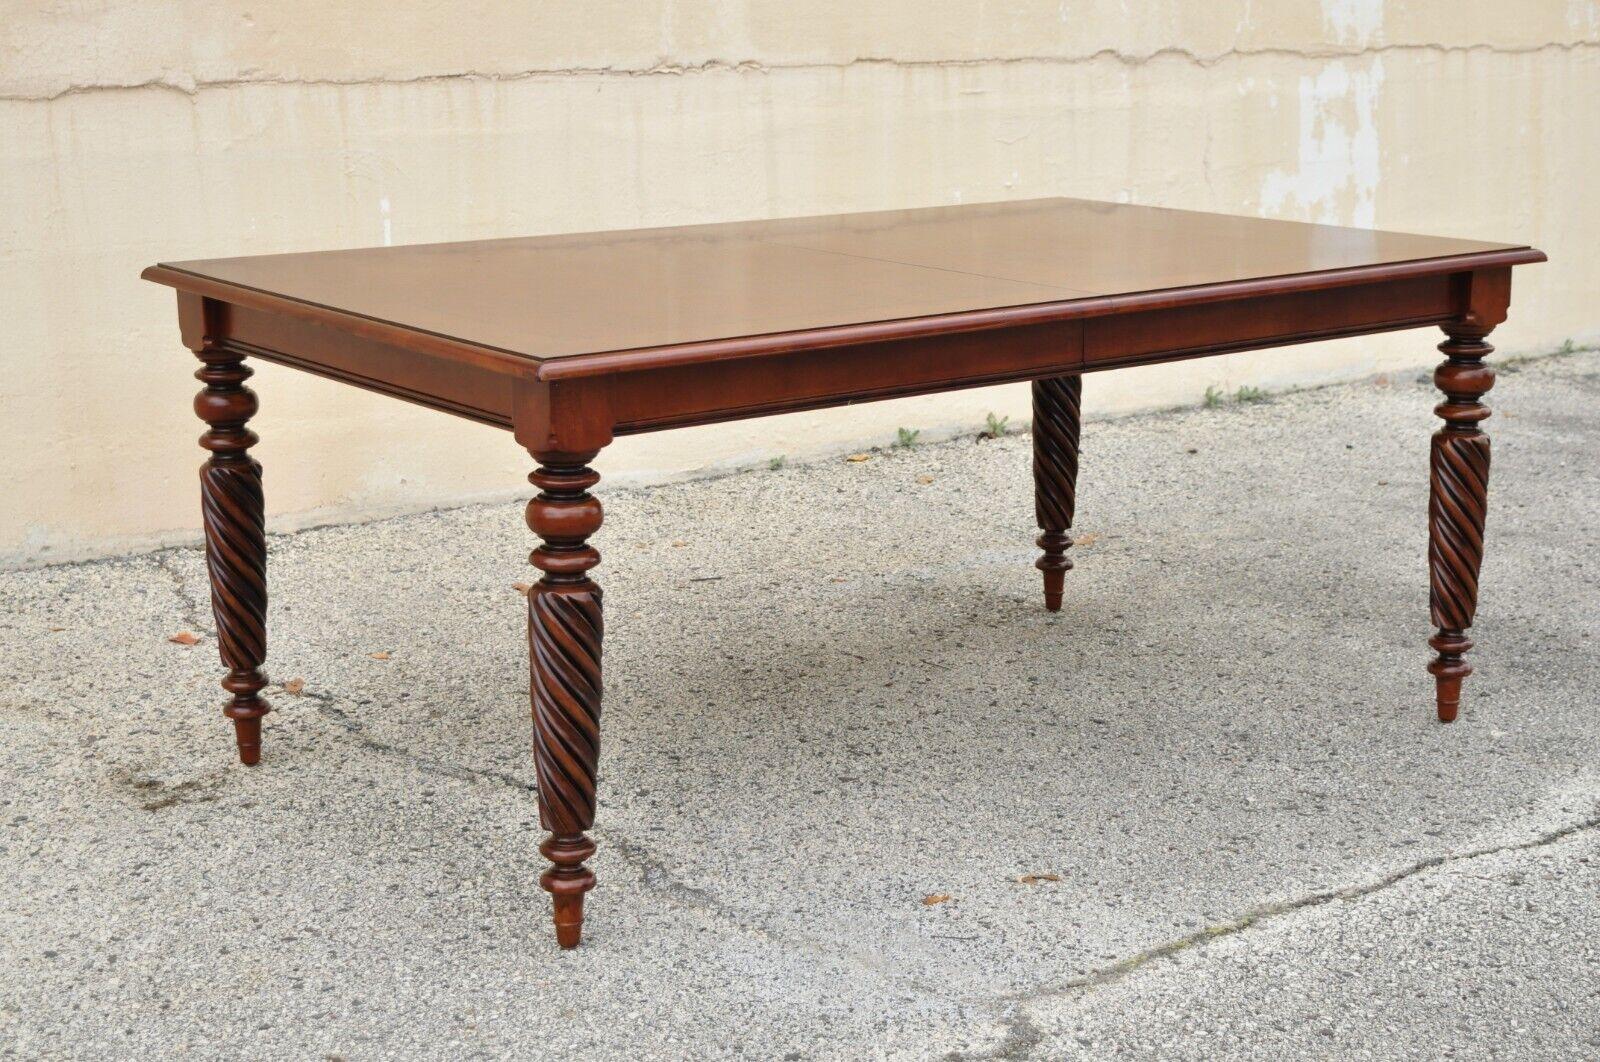 Ethan Allen British classics cherry wood rectangular dining table. Item features spiral carved legs, banded top, beautiful wood grain, original label, great style and form. Circa 2008. Measurements: 31